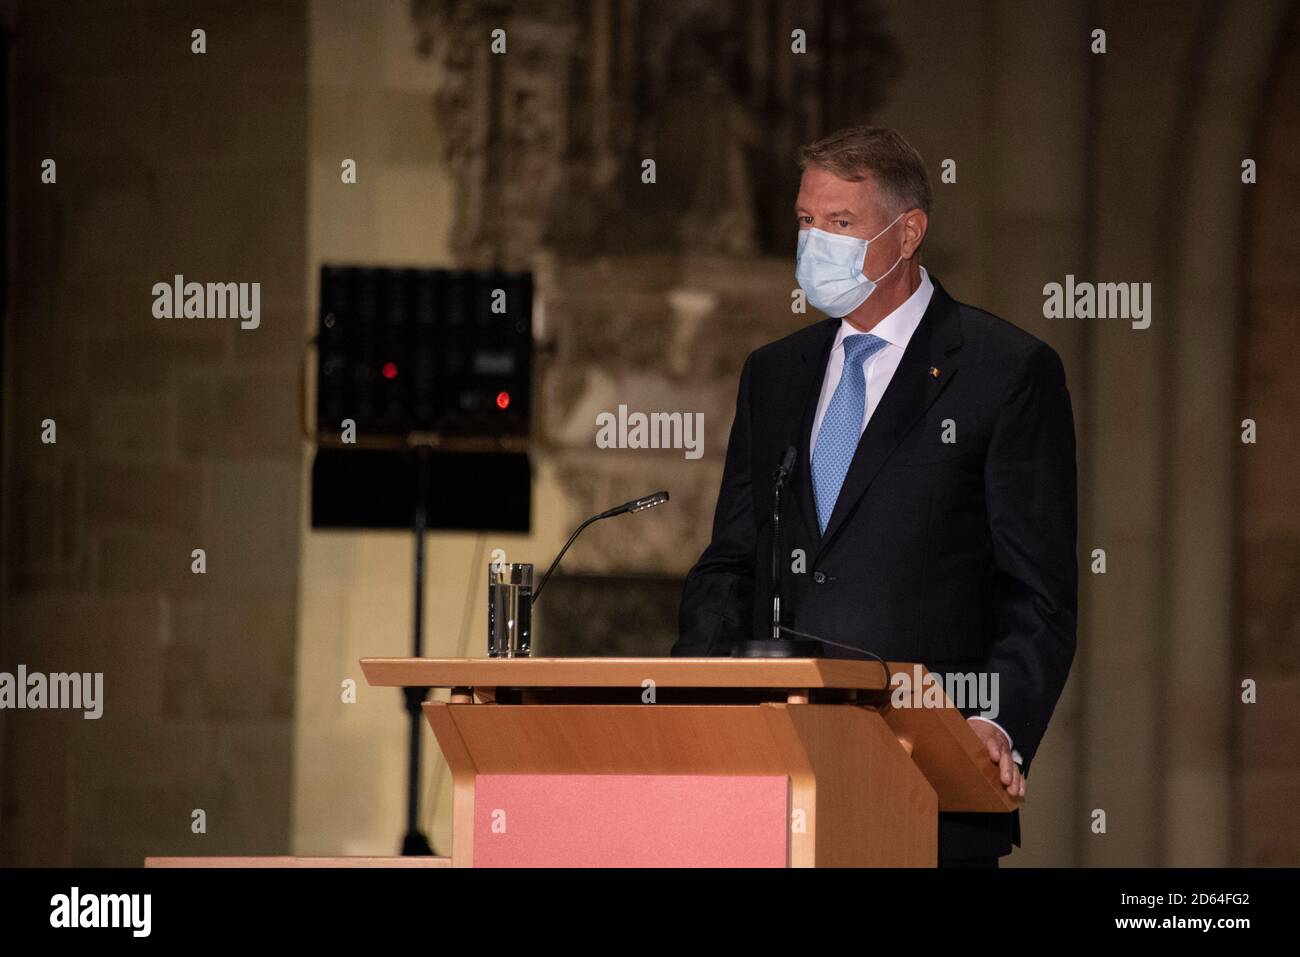 Magdeburg, Germany. 14th Oct 2020. The Romanian President Klaus Werner Iohannis thanked for the award of the Kaiser Otto Prize with a pro-European speech in Magdeburg Cathedral. This prize is awarded every two years to persons who are committed to dialogue, peace and cohesion in Europe. Credit: Mattis Kaminer/Alamy Live News Stock Photo